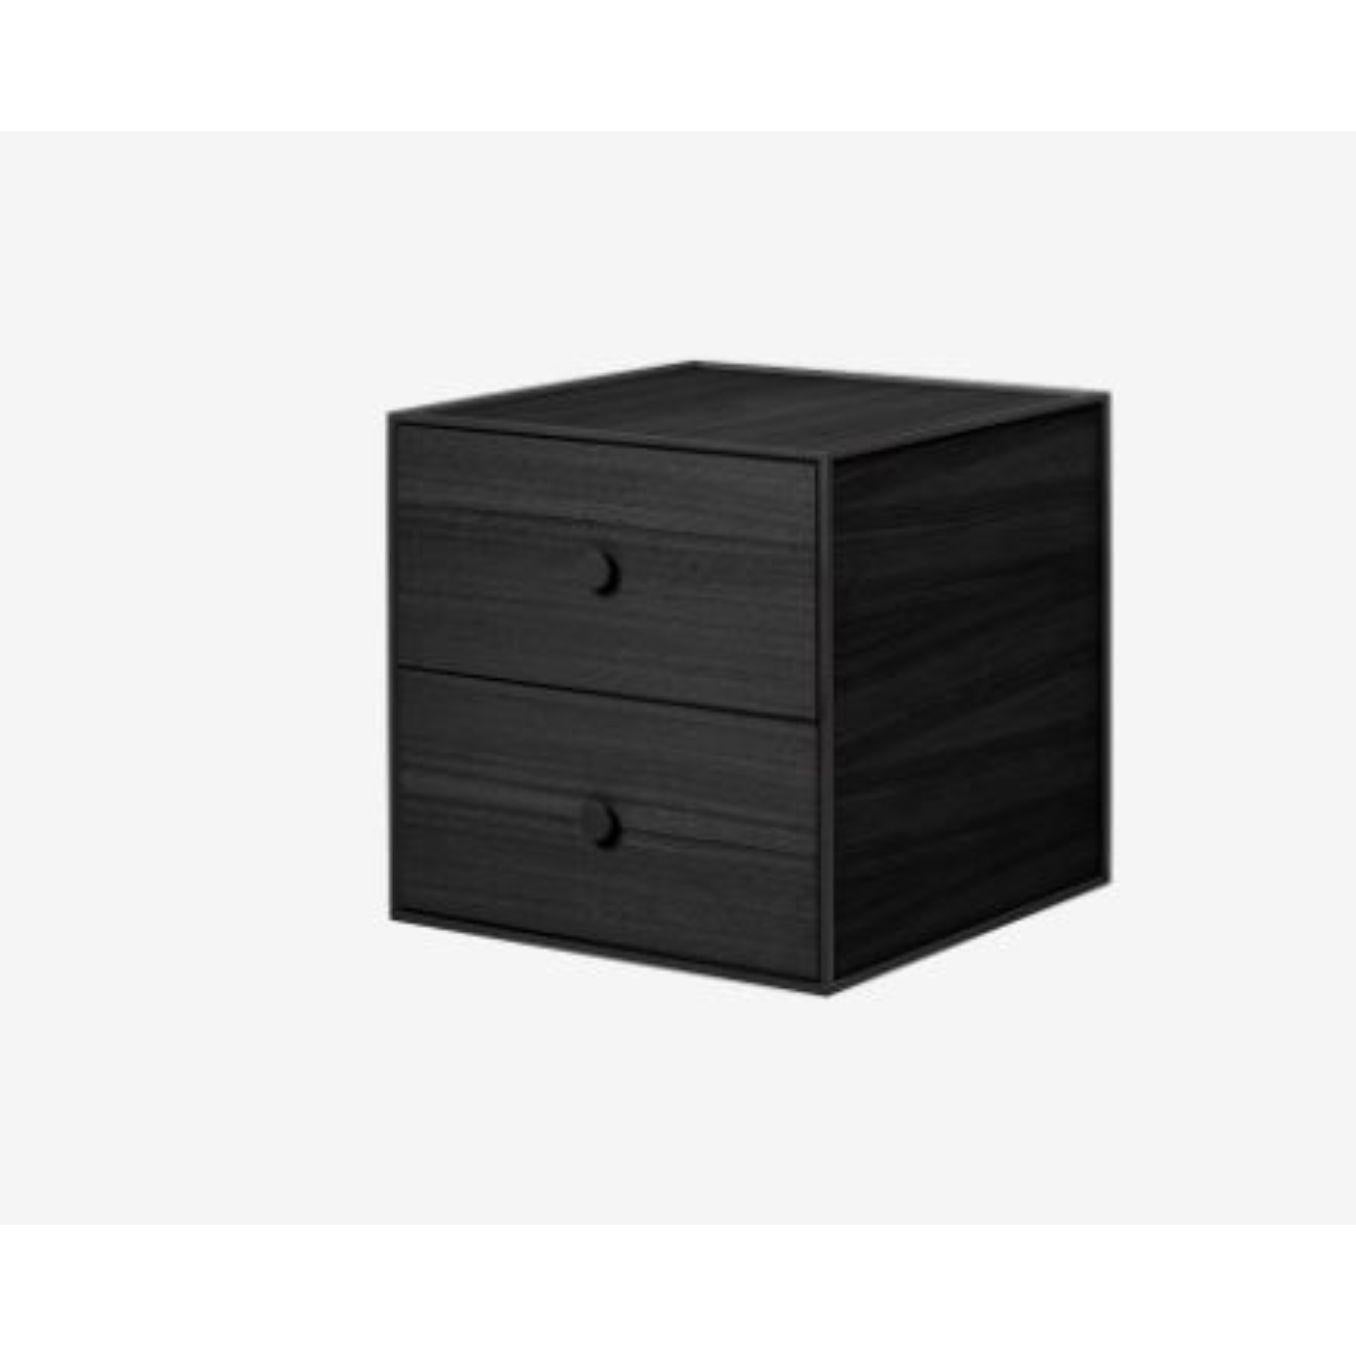 35 black ash frame box with 2 drawer by Lassen
Dimensions: W 35 x D 35 x H 35 cm 
Materials: Finér, Melamin, Melamin, Melamine, metal, veneer, ash
Also available in different colours and dimensions. 
Weight: 10.50, 10.50, 11.50, 11.50